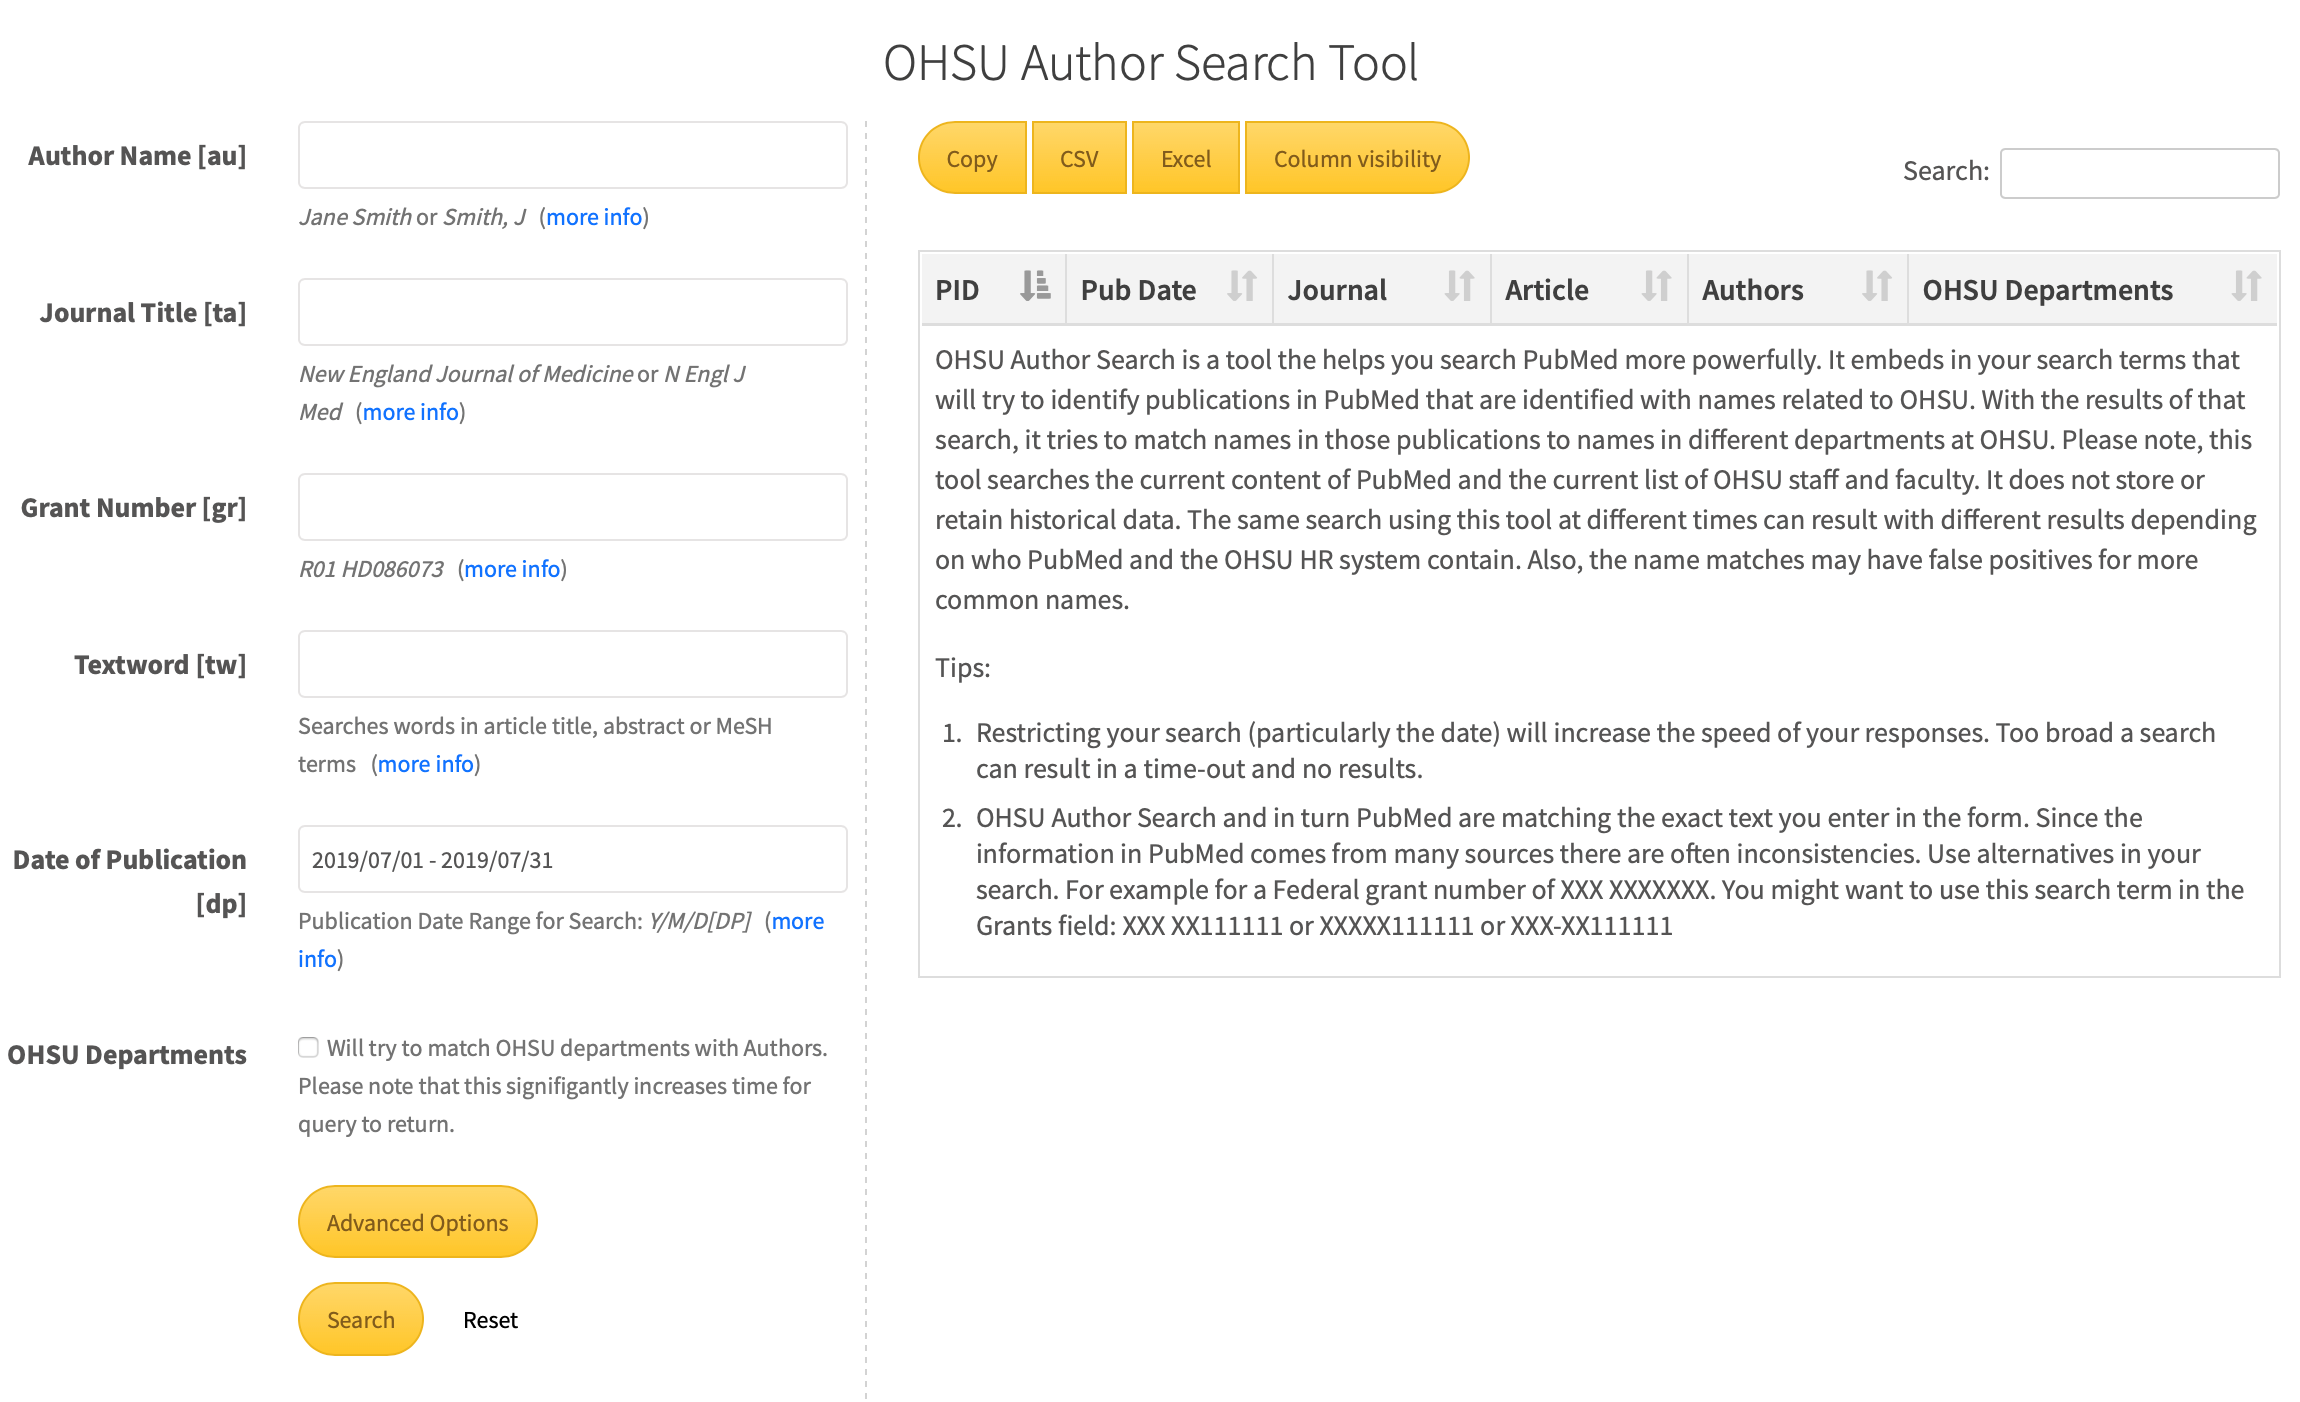 OHSU Author Search Tool